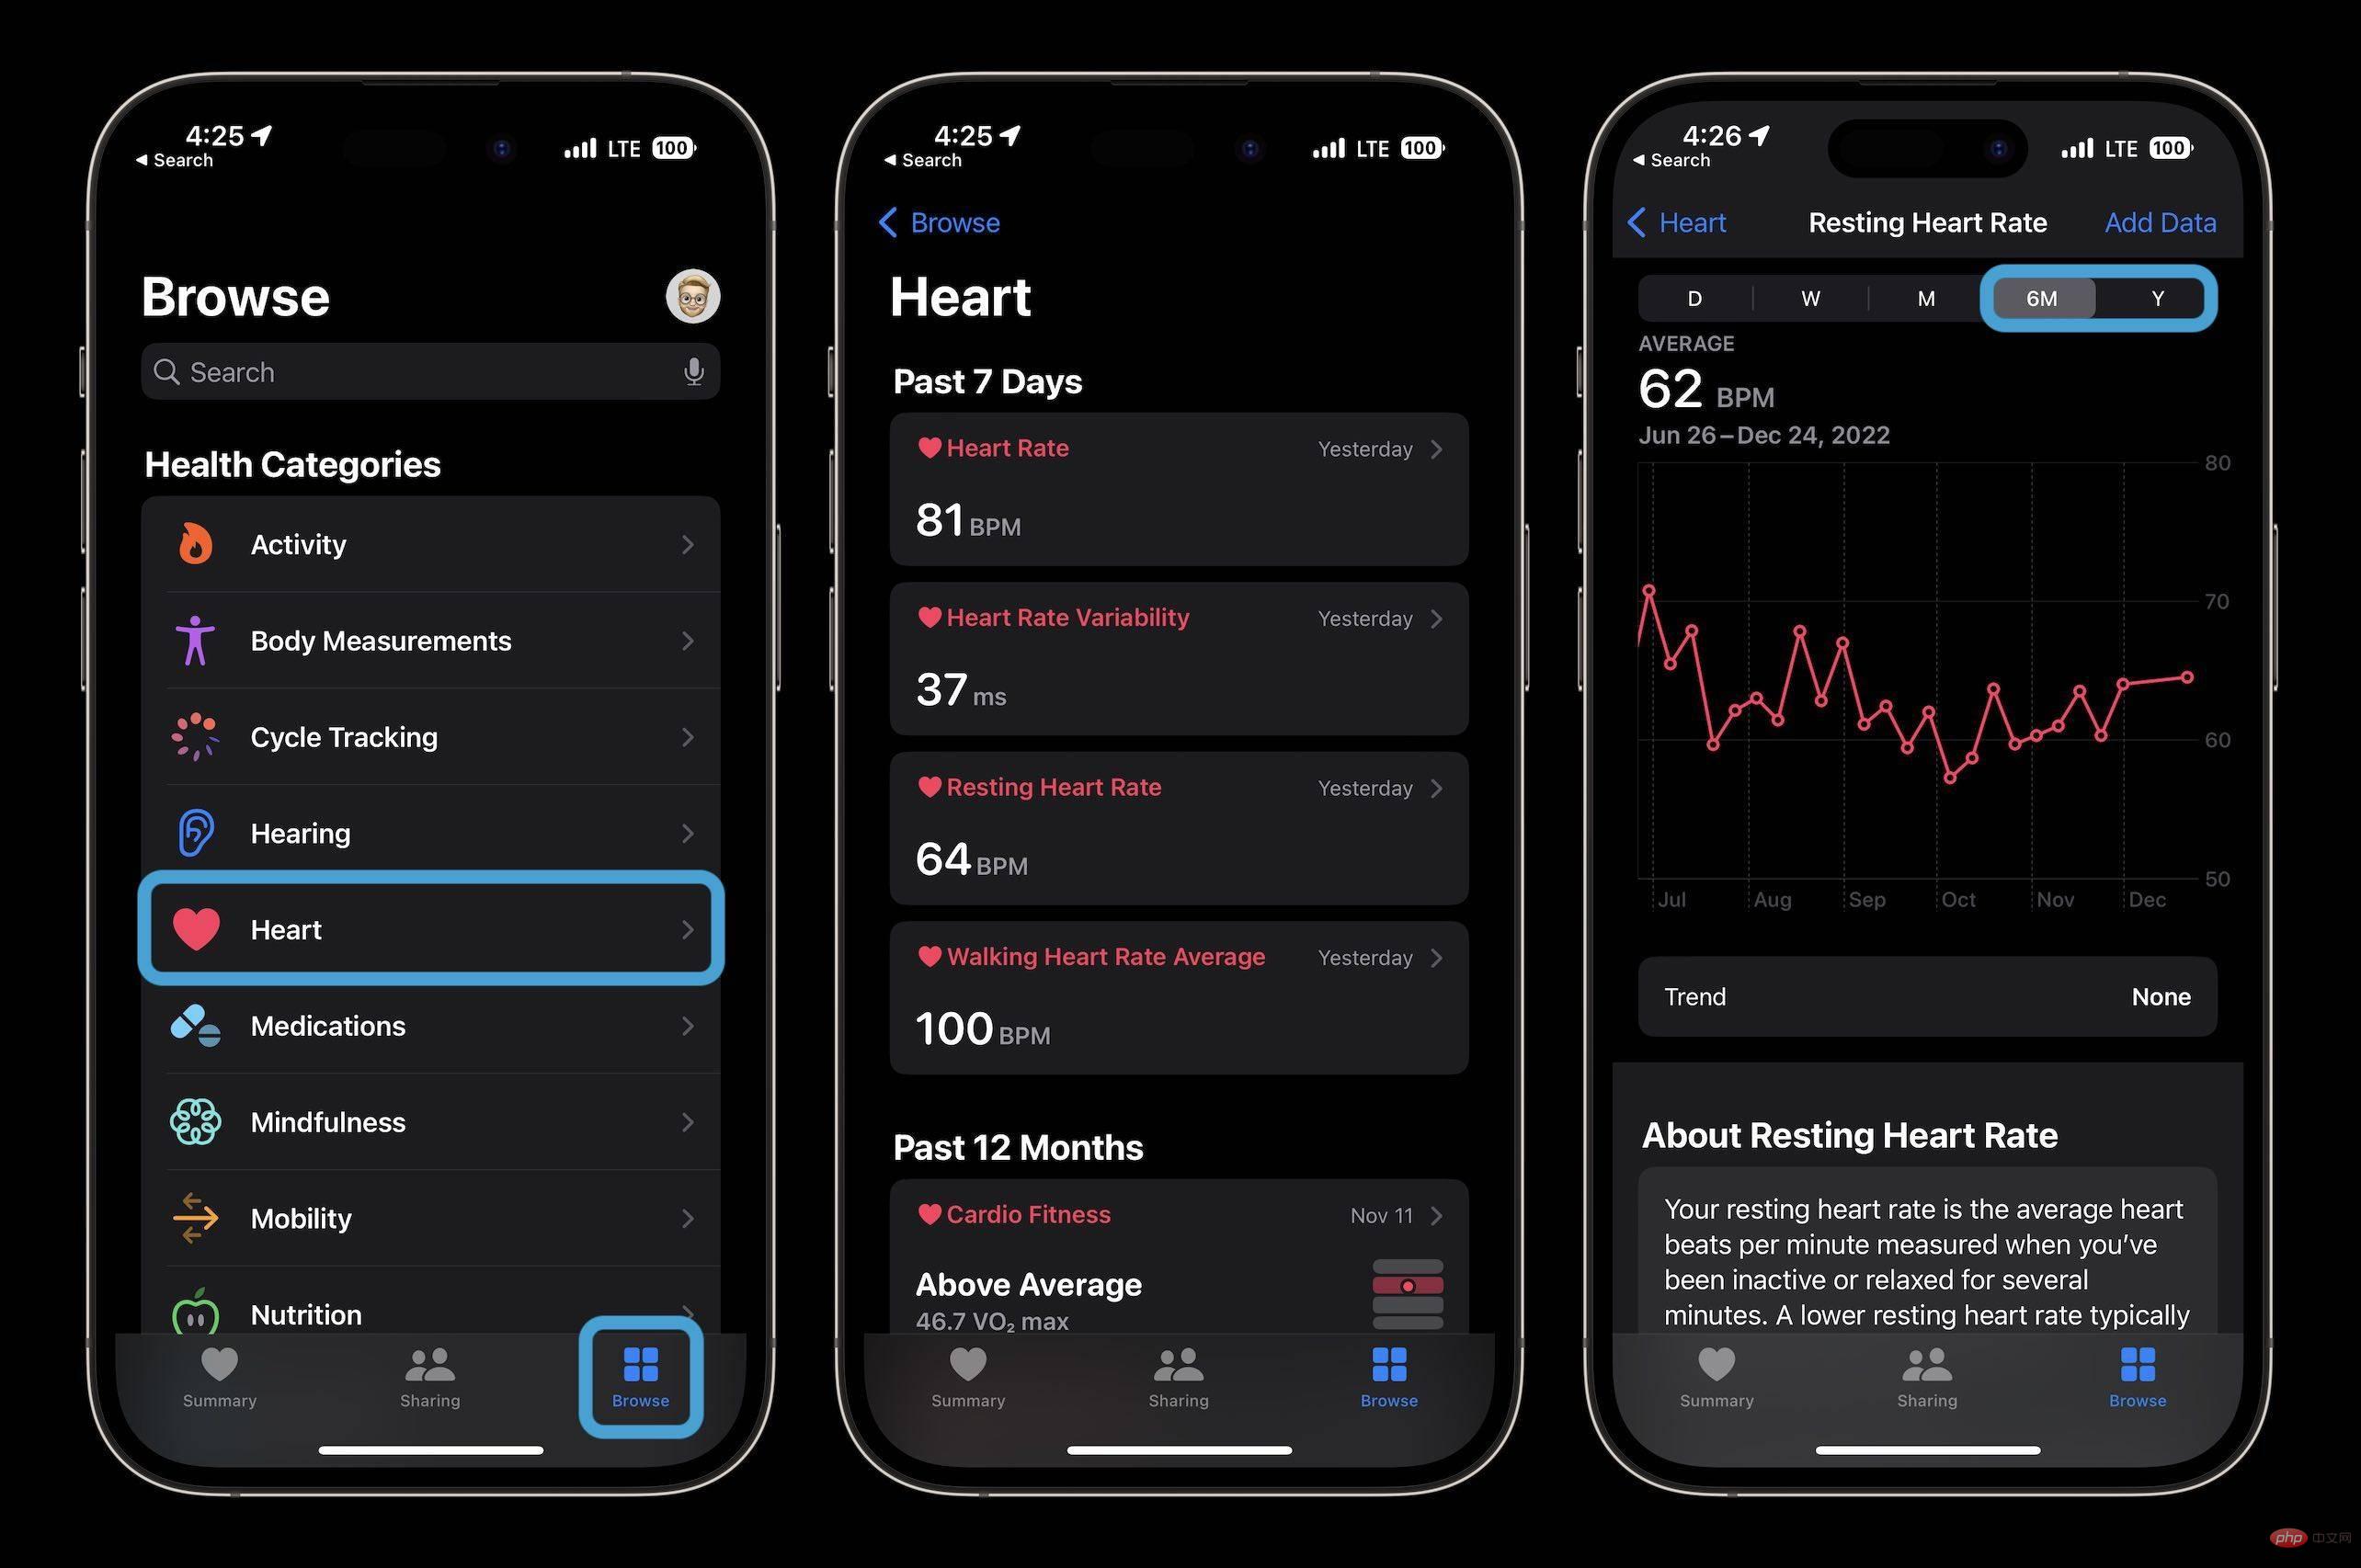 Apple Watch: How to view detailed heart rate history